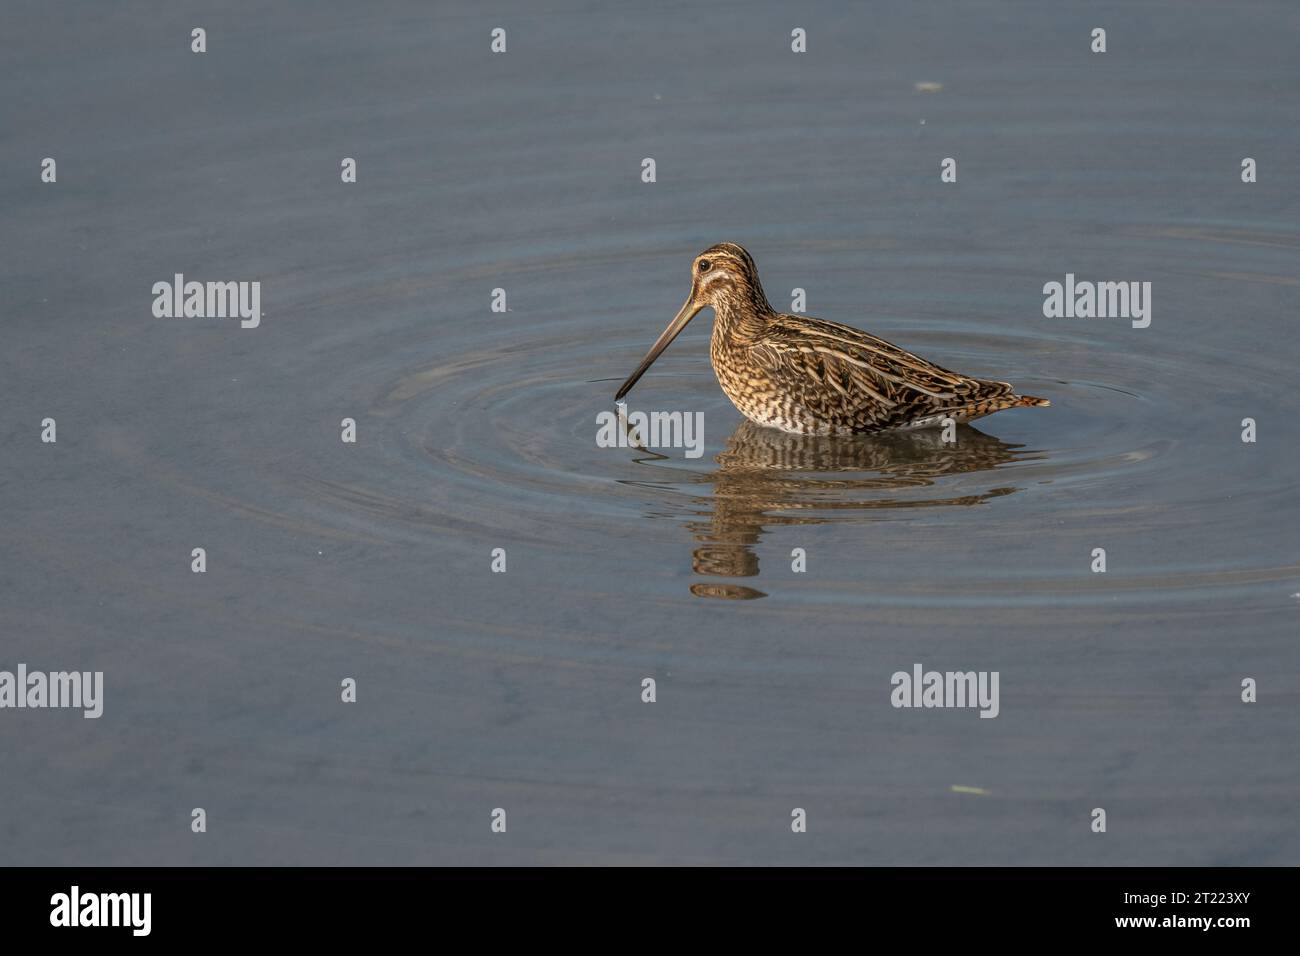 Common Snipe (Gallinago gallinago) searching for food in a marsh. Bas-Rhin, Collectivite europeenne d'Alsace,Grand Est, France, Europe. Stock Photo